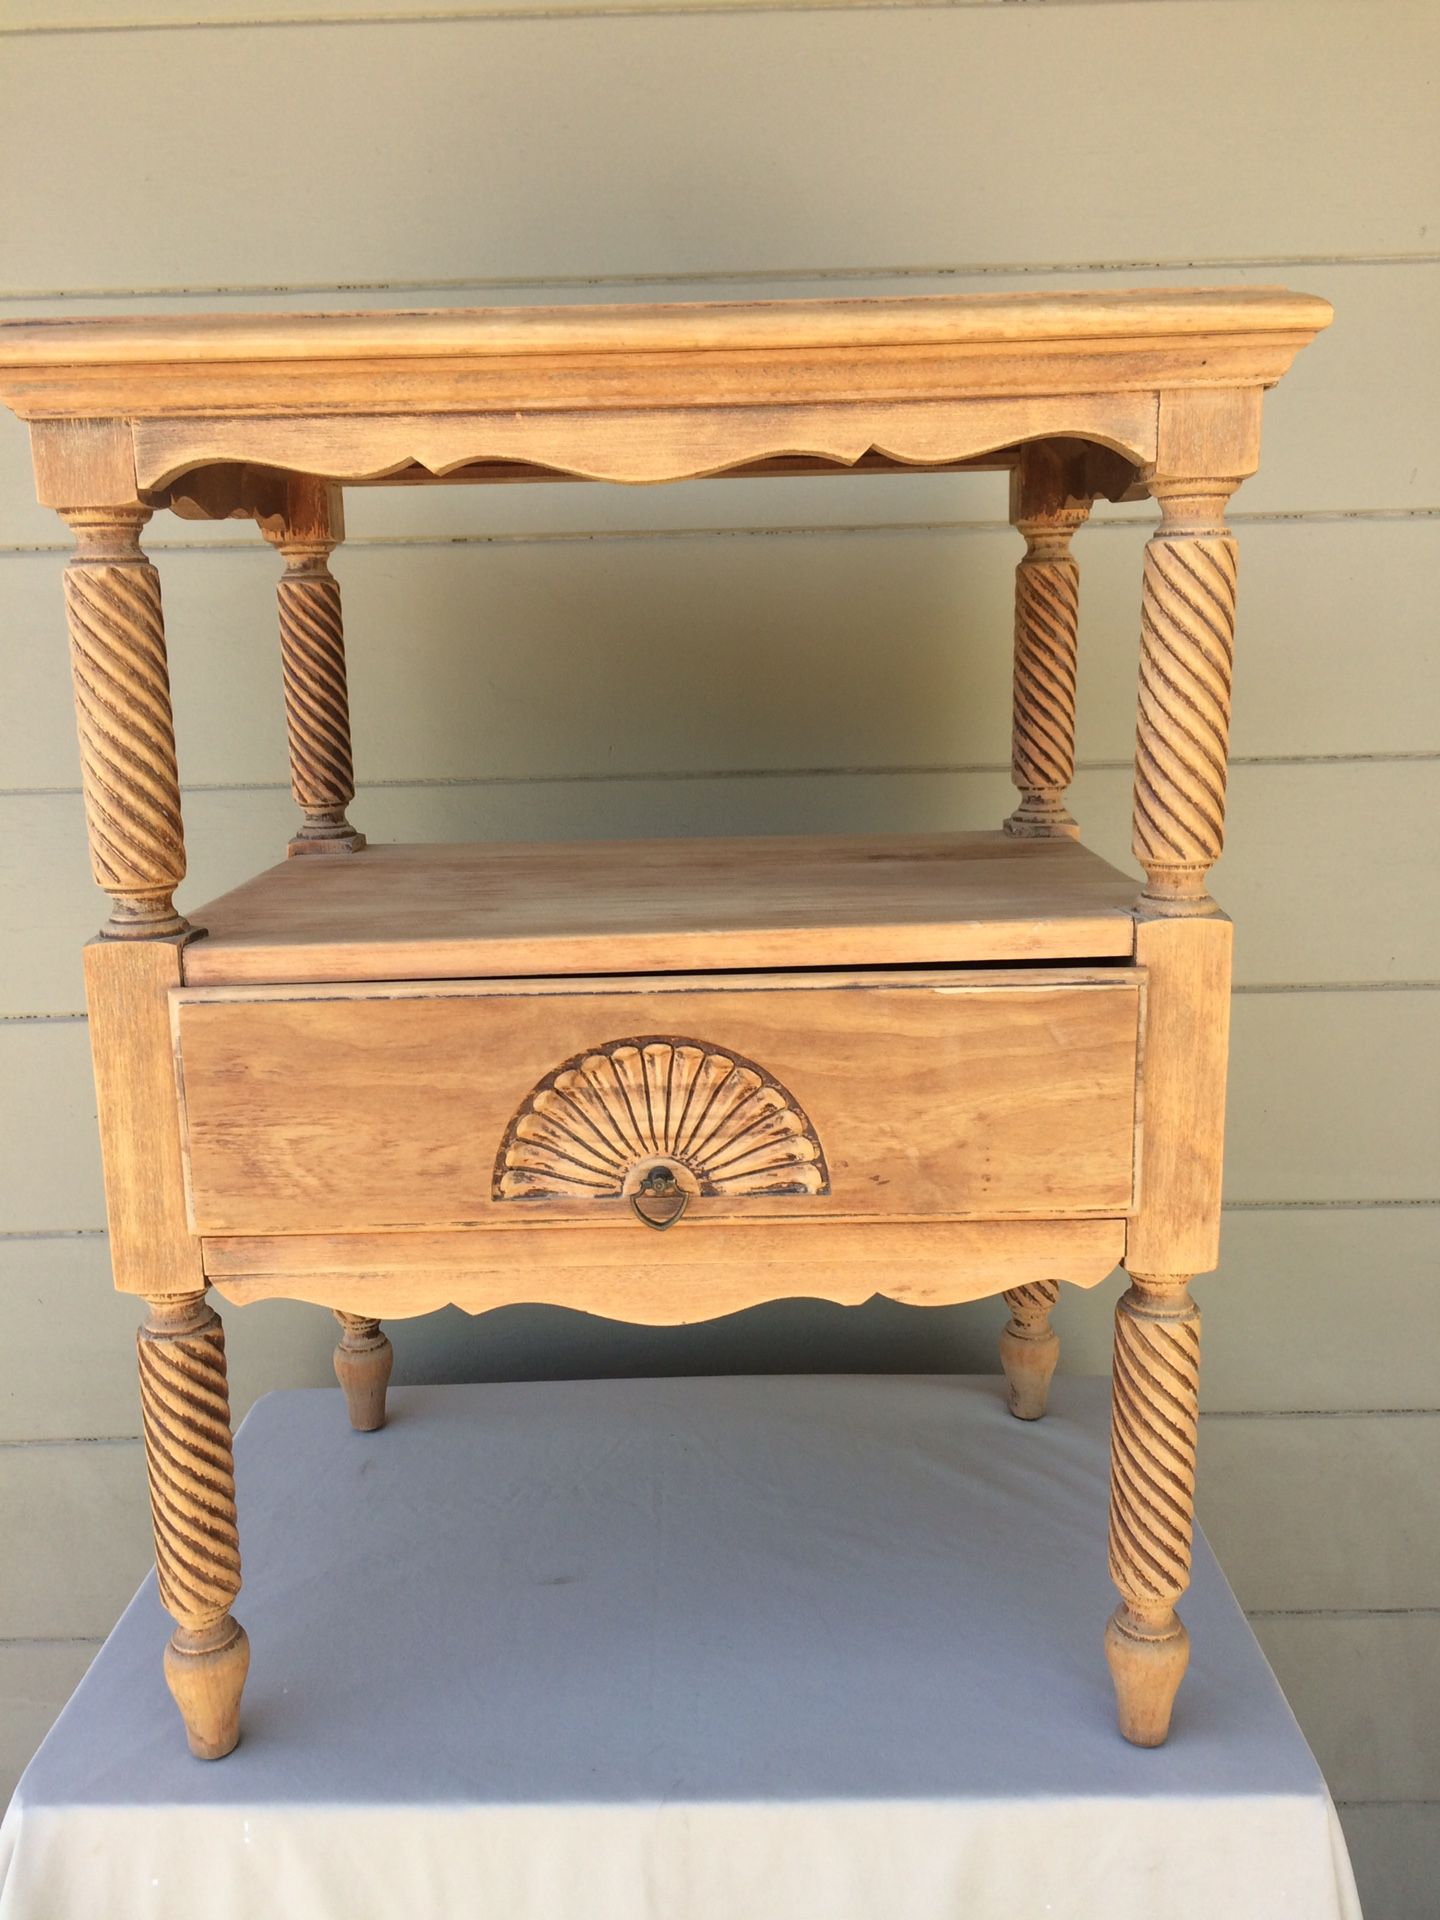 NIGHT STAND / END TABLE. MID CENTURY. Solid Maple Wood. 1 Drawer. 22x16x28h. Excellent Condition. Pick up in Escondido. $28.00